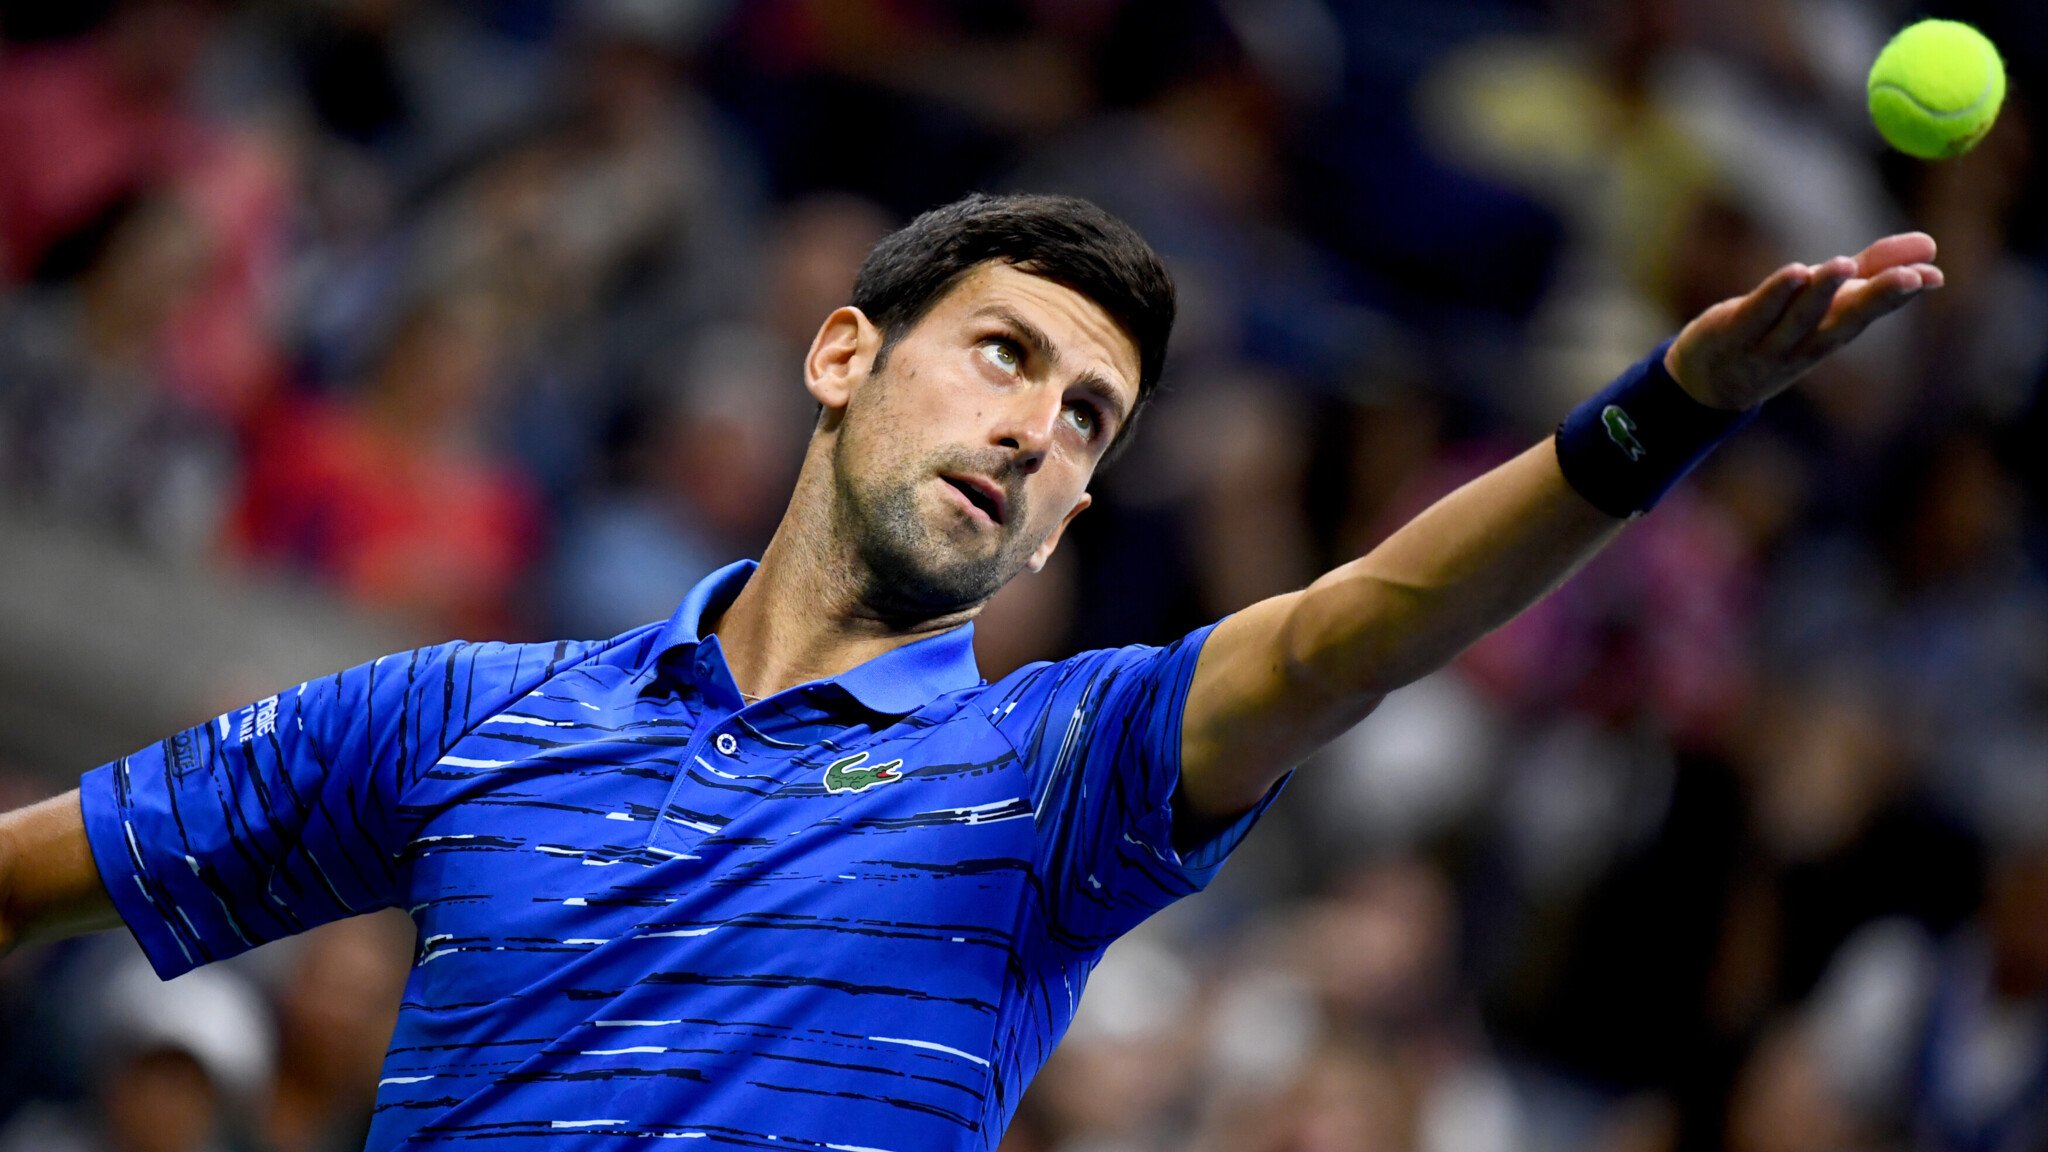 US Open Day 1 Preview: Five Must-See Matches - UBITENNIS